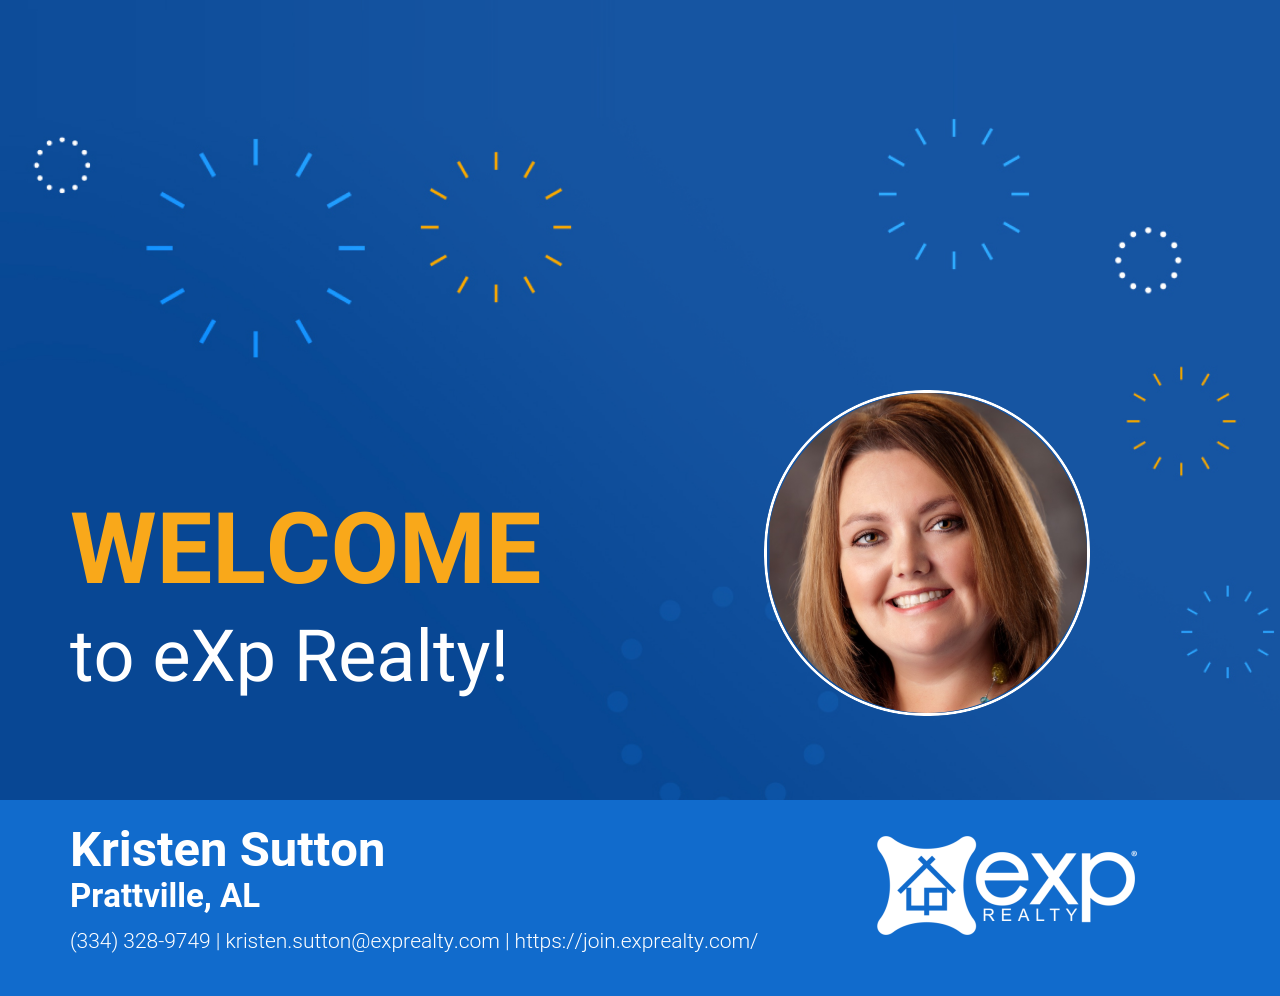 eXp Realty Welcomes Kristen Sutton!